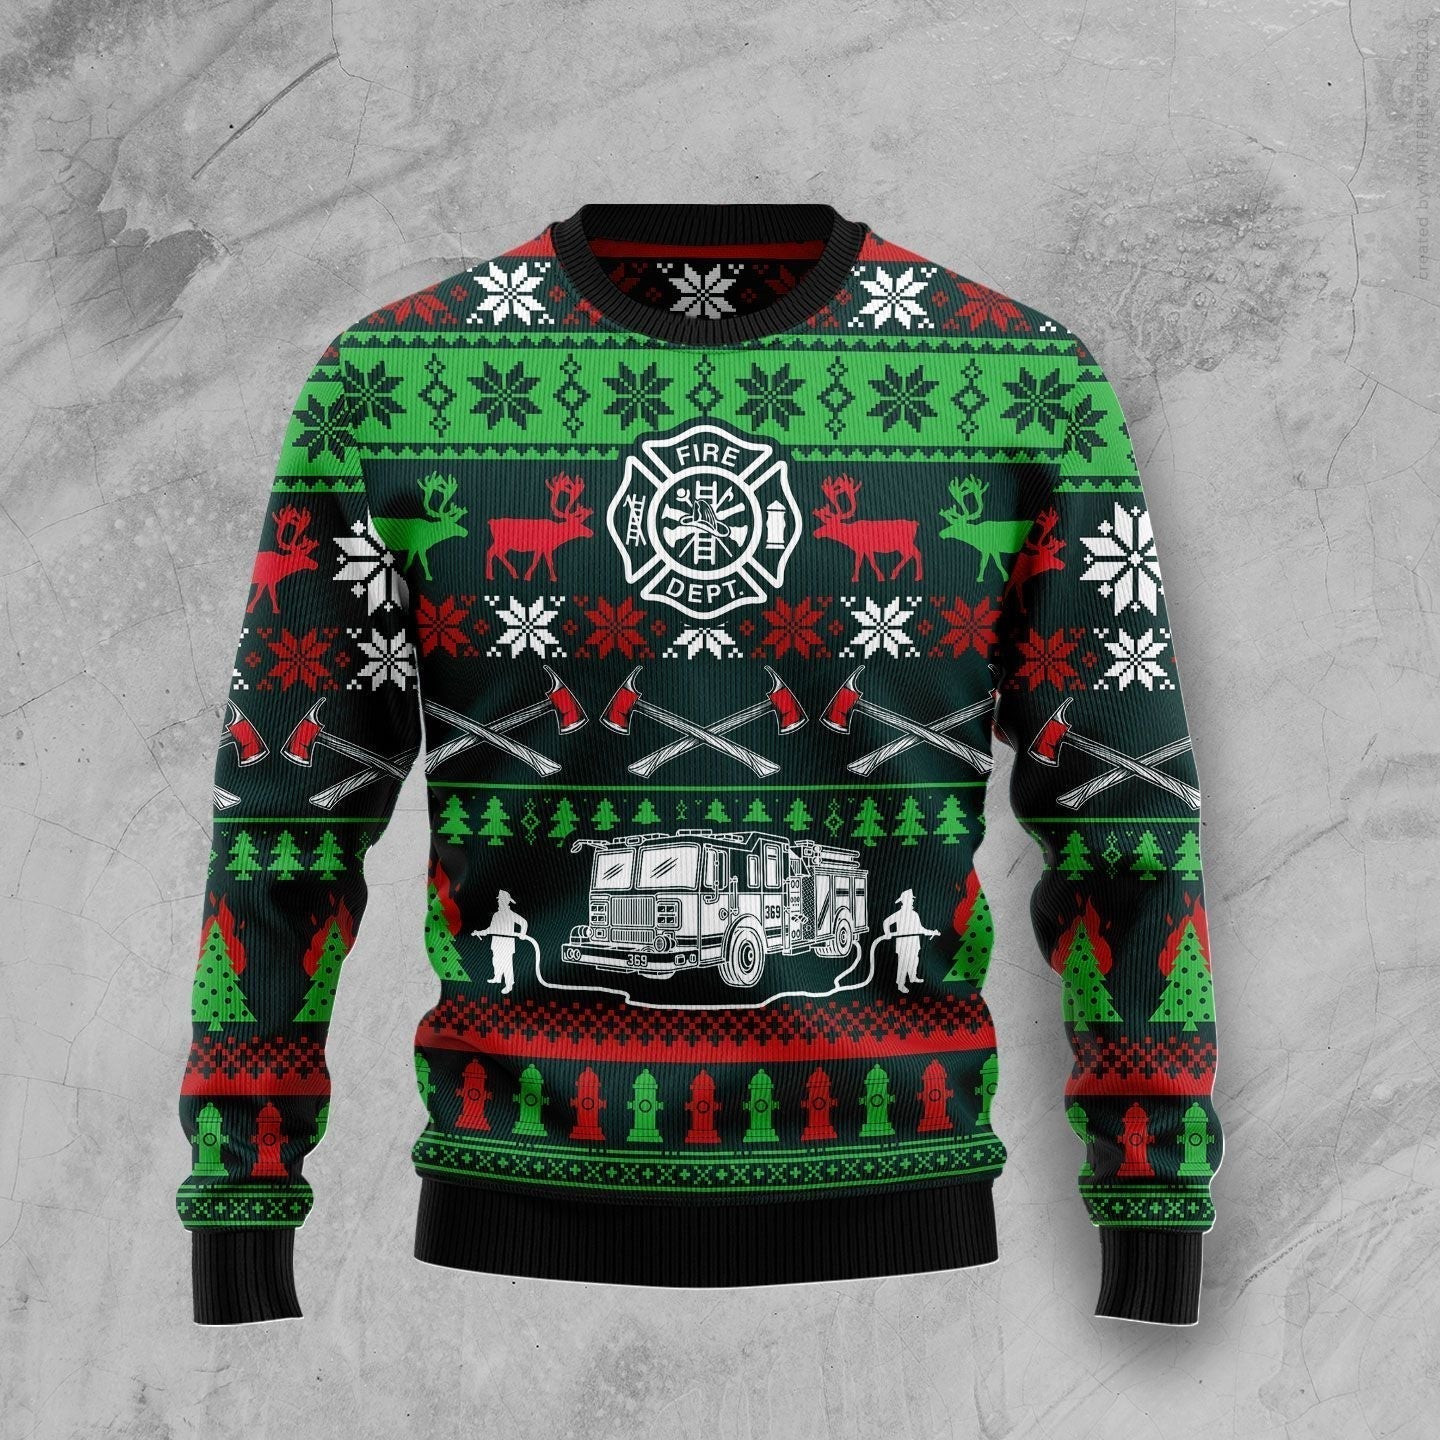 Awesome Firefighter Ugly Christmas Sweater